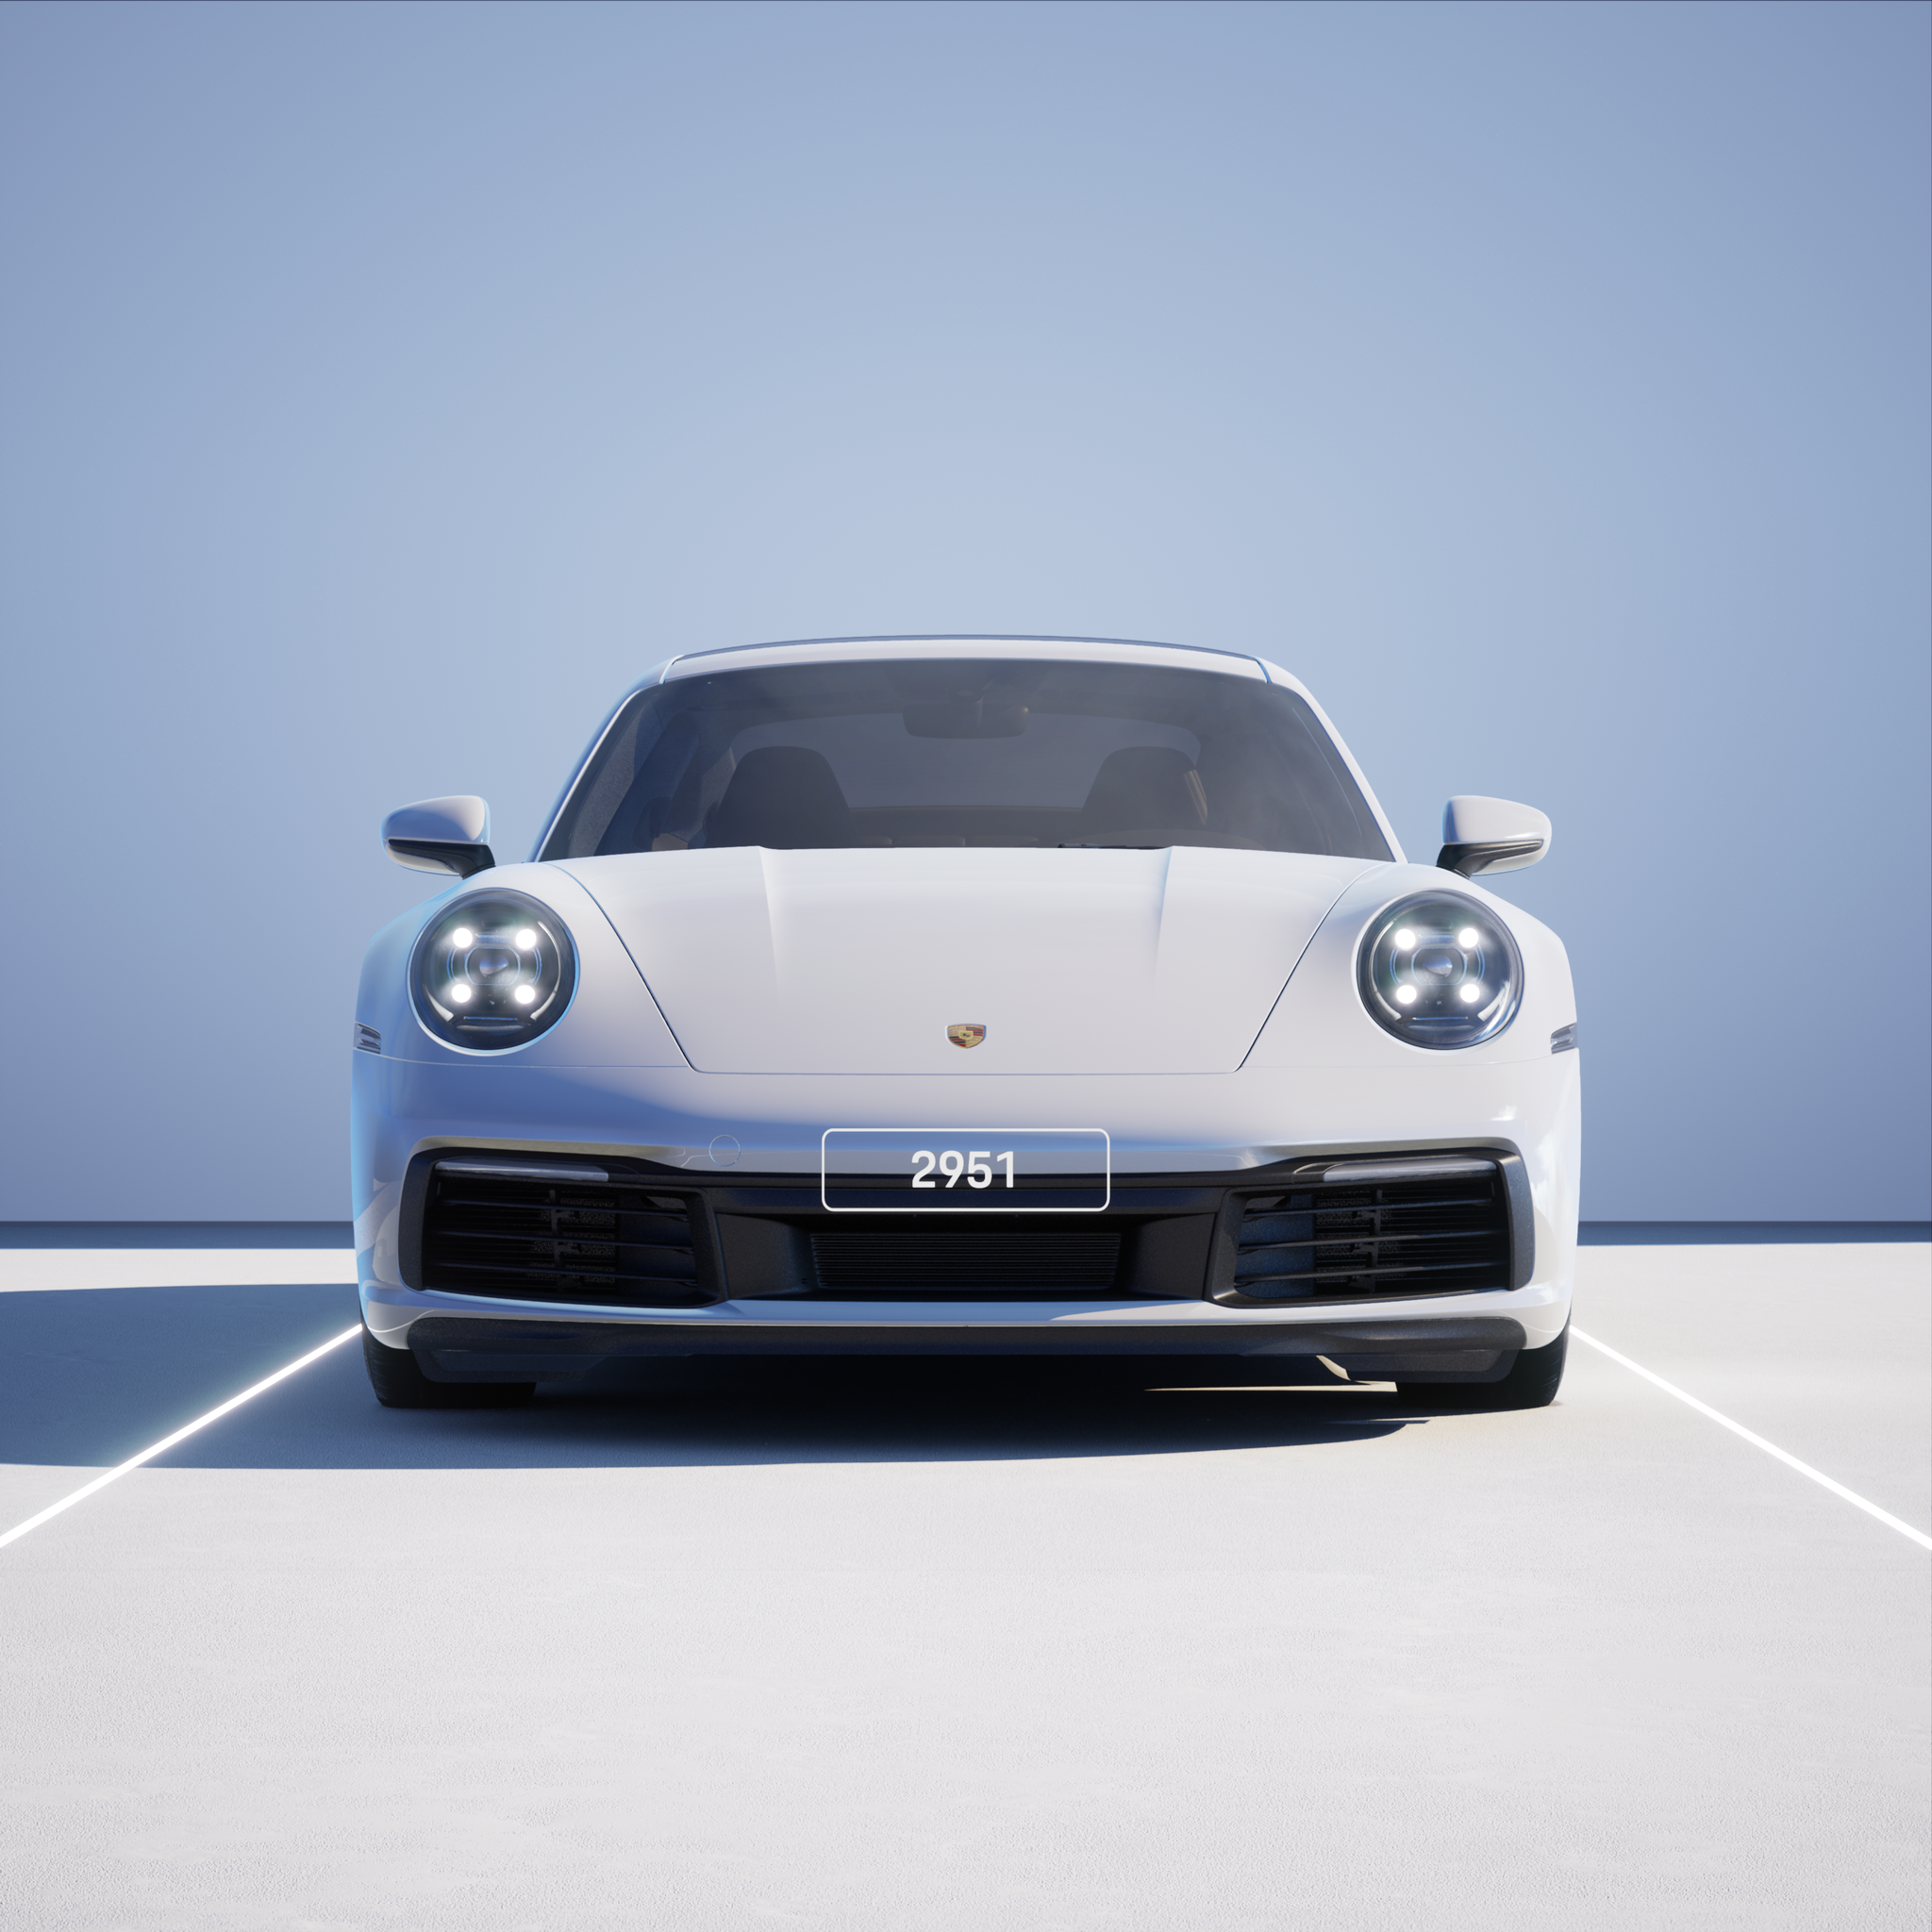 The PORSCHΞ 911 2951 image in phase